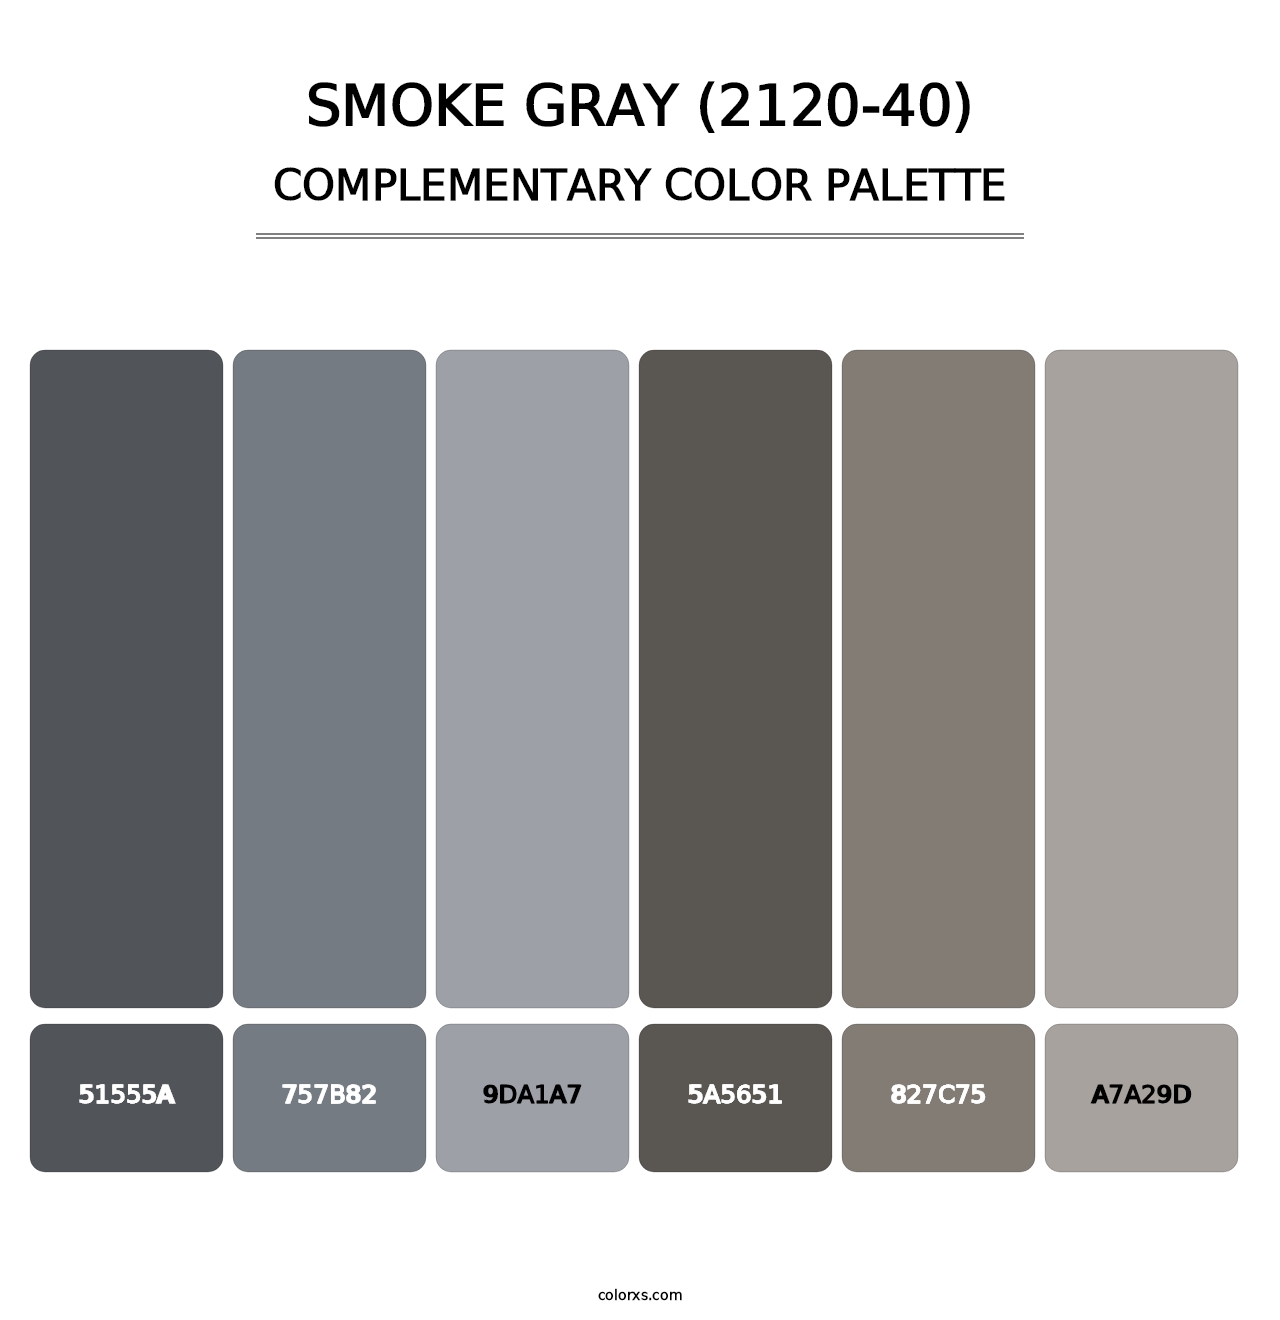 Smoke Gray (2120-40) - Complementary Color Palette